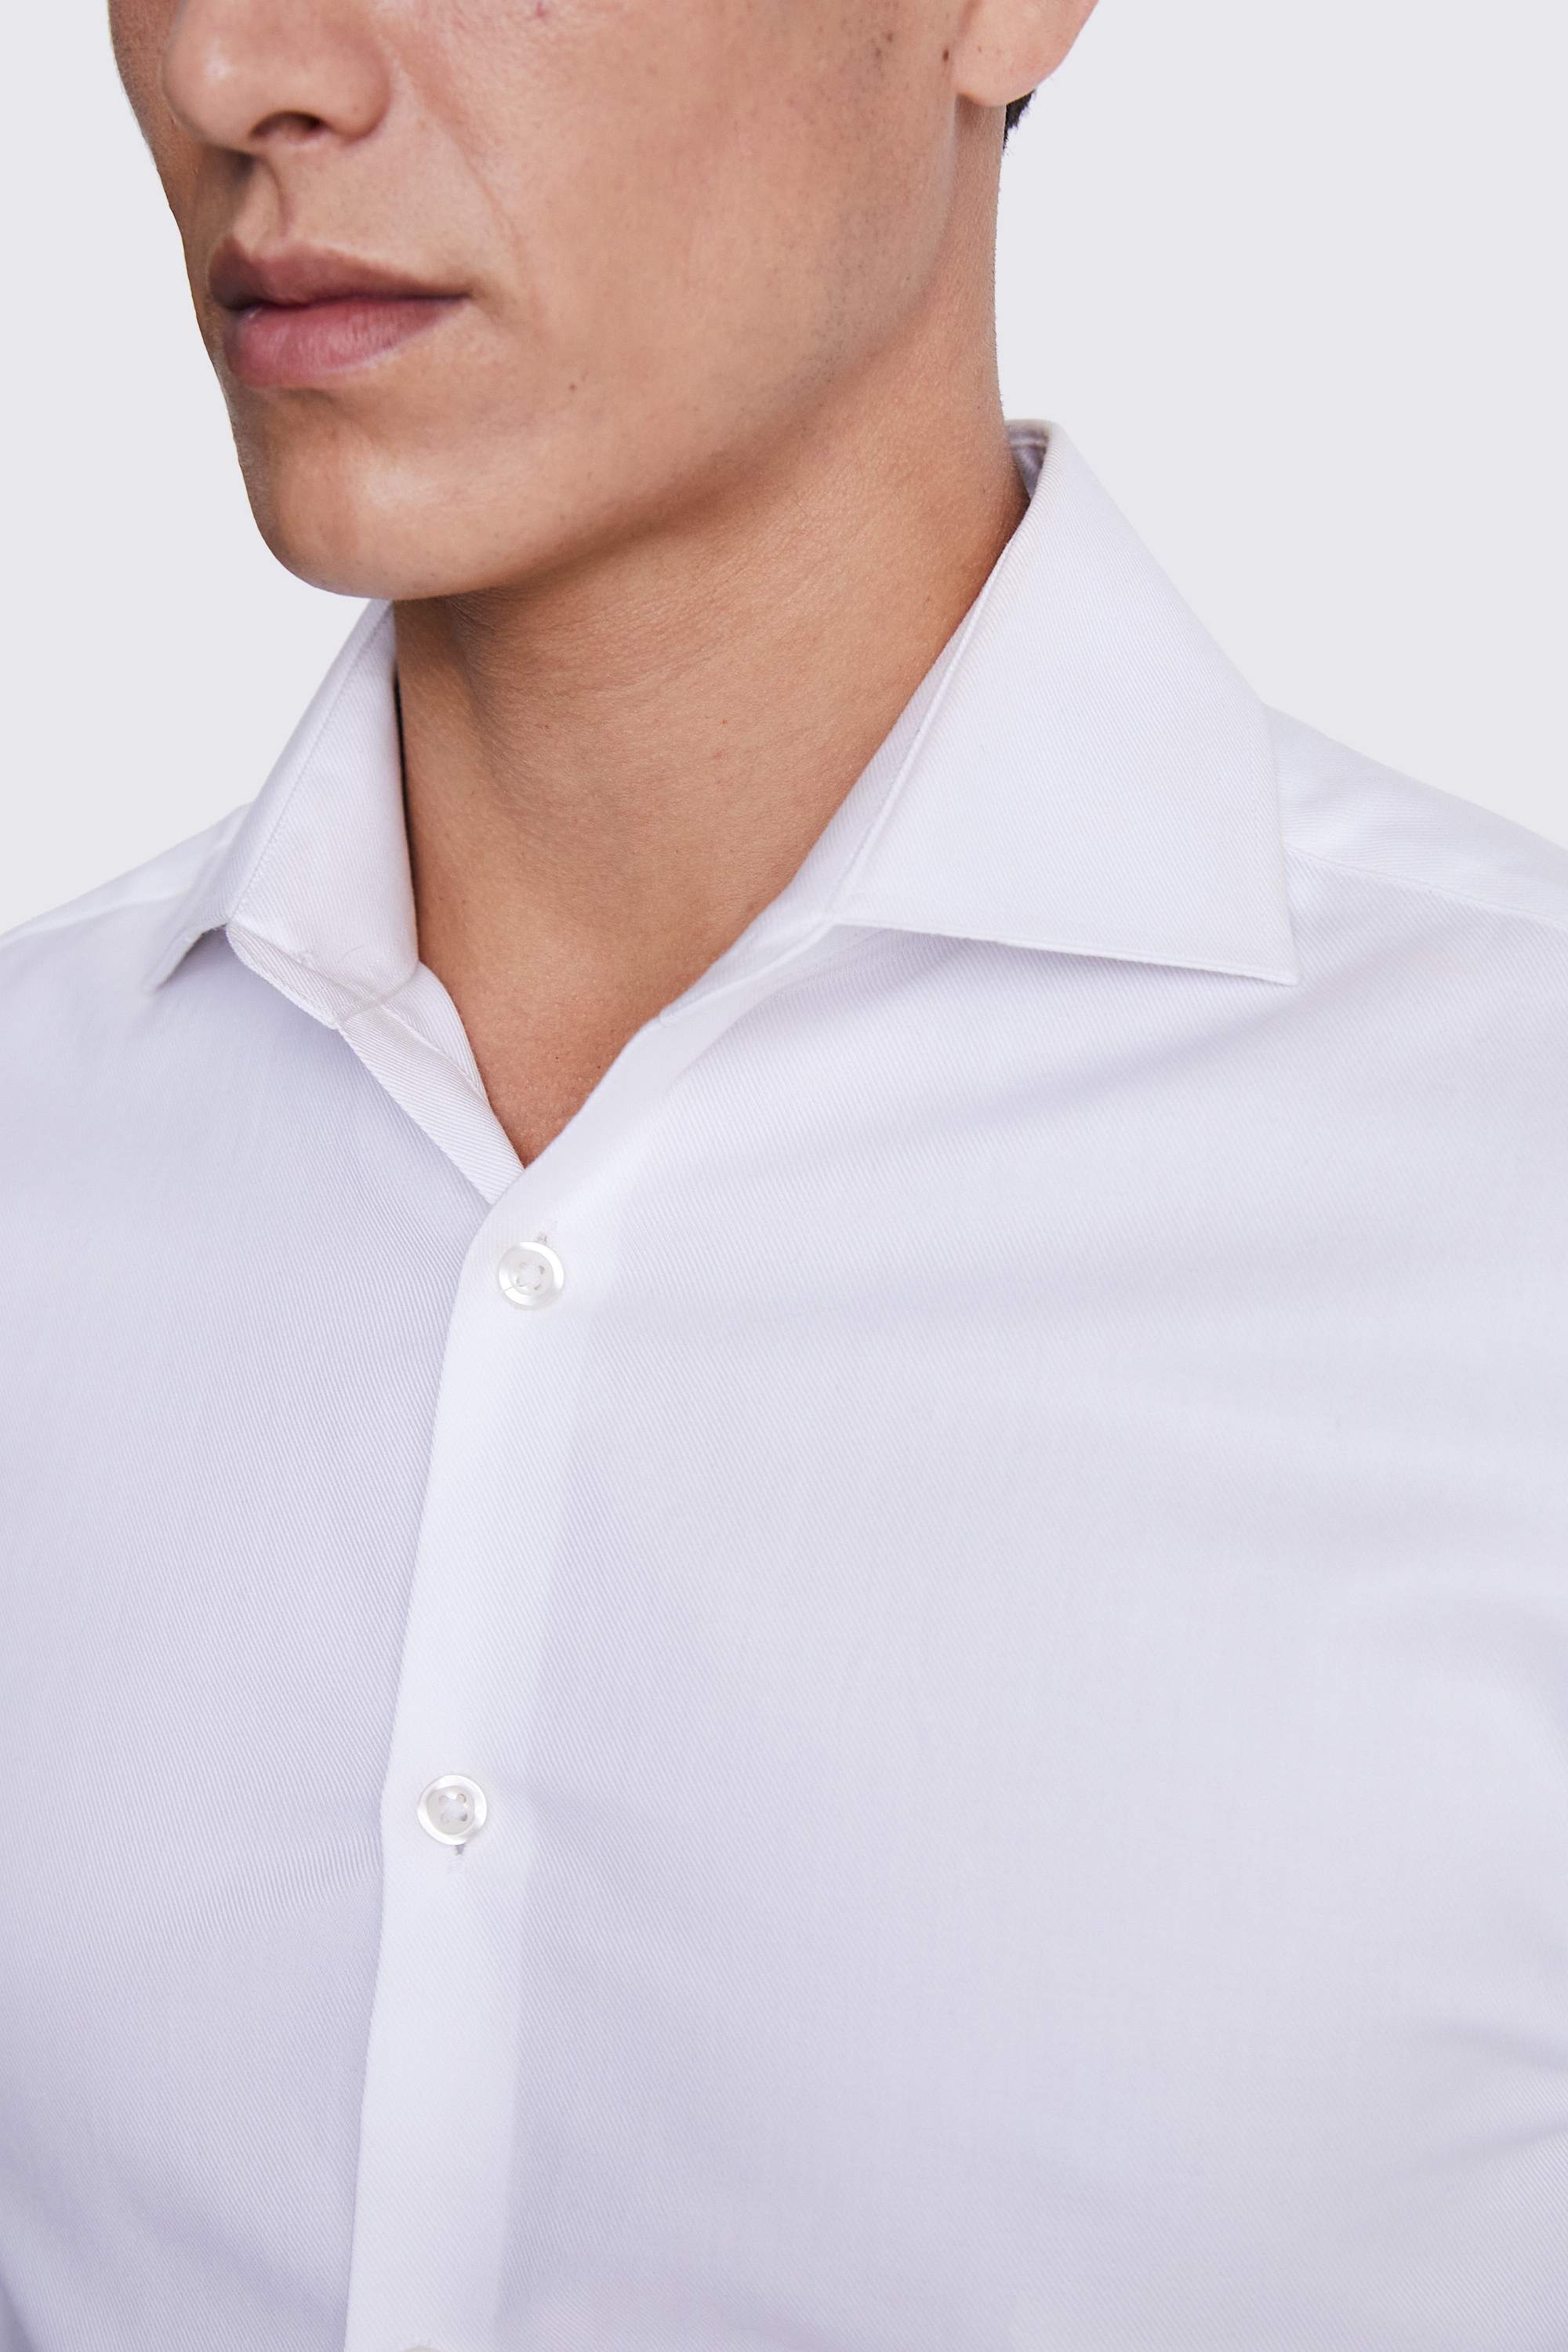 Slim Fit White Twill Shirt | Buy Online at Moss